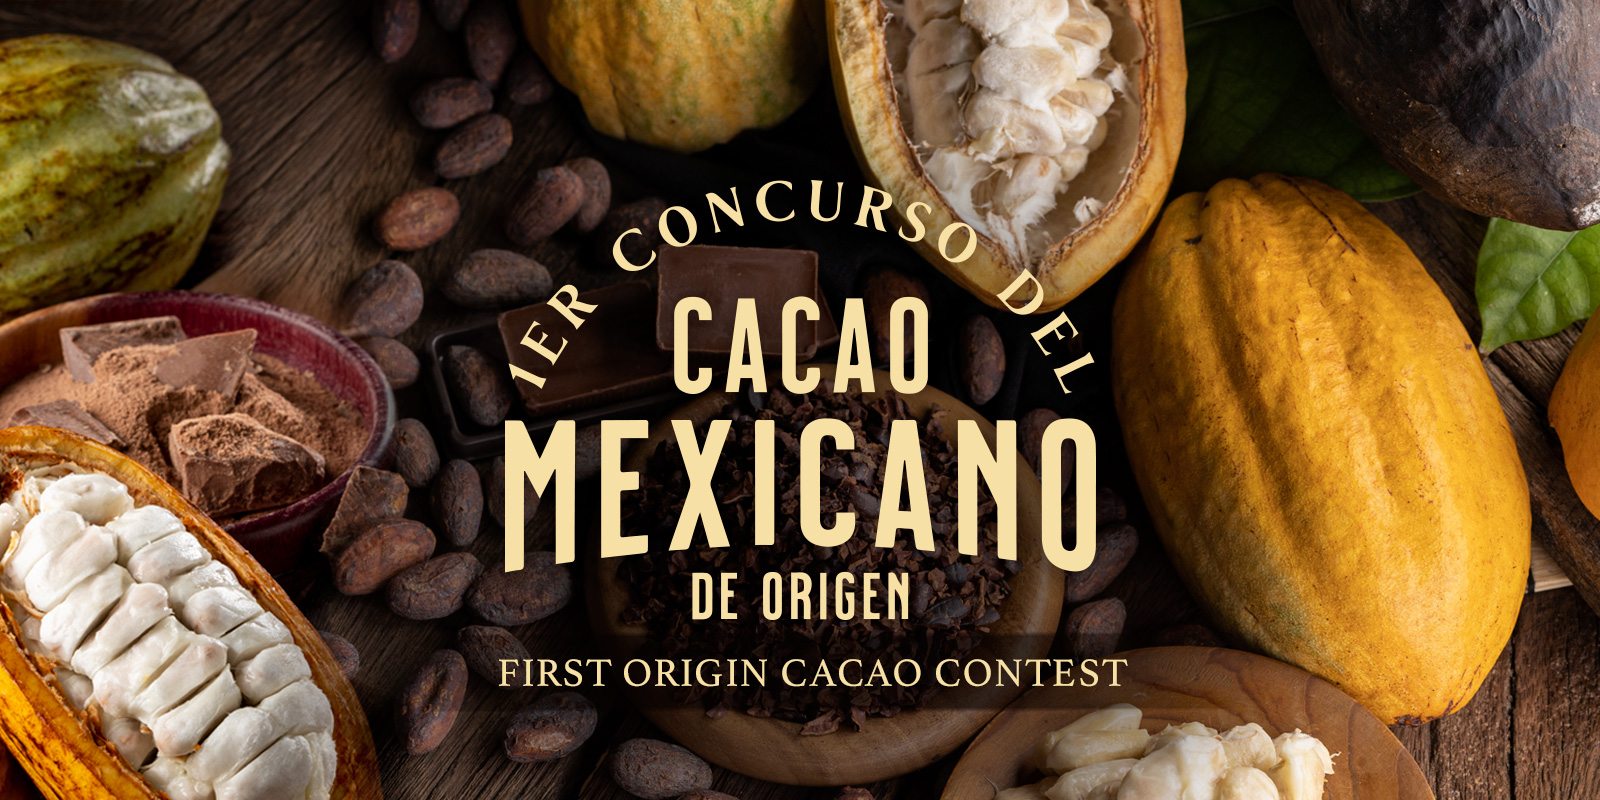 First contest of the Mexican cacao of origin